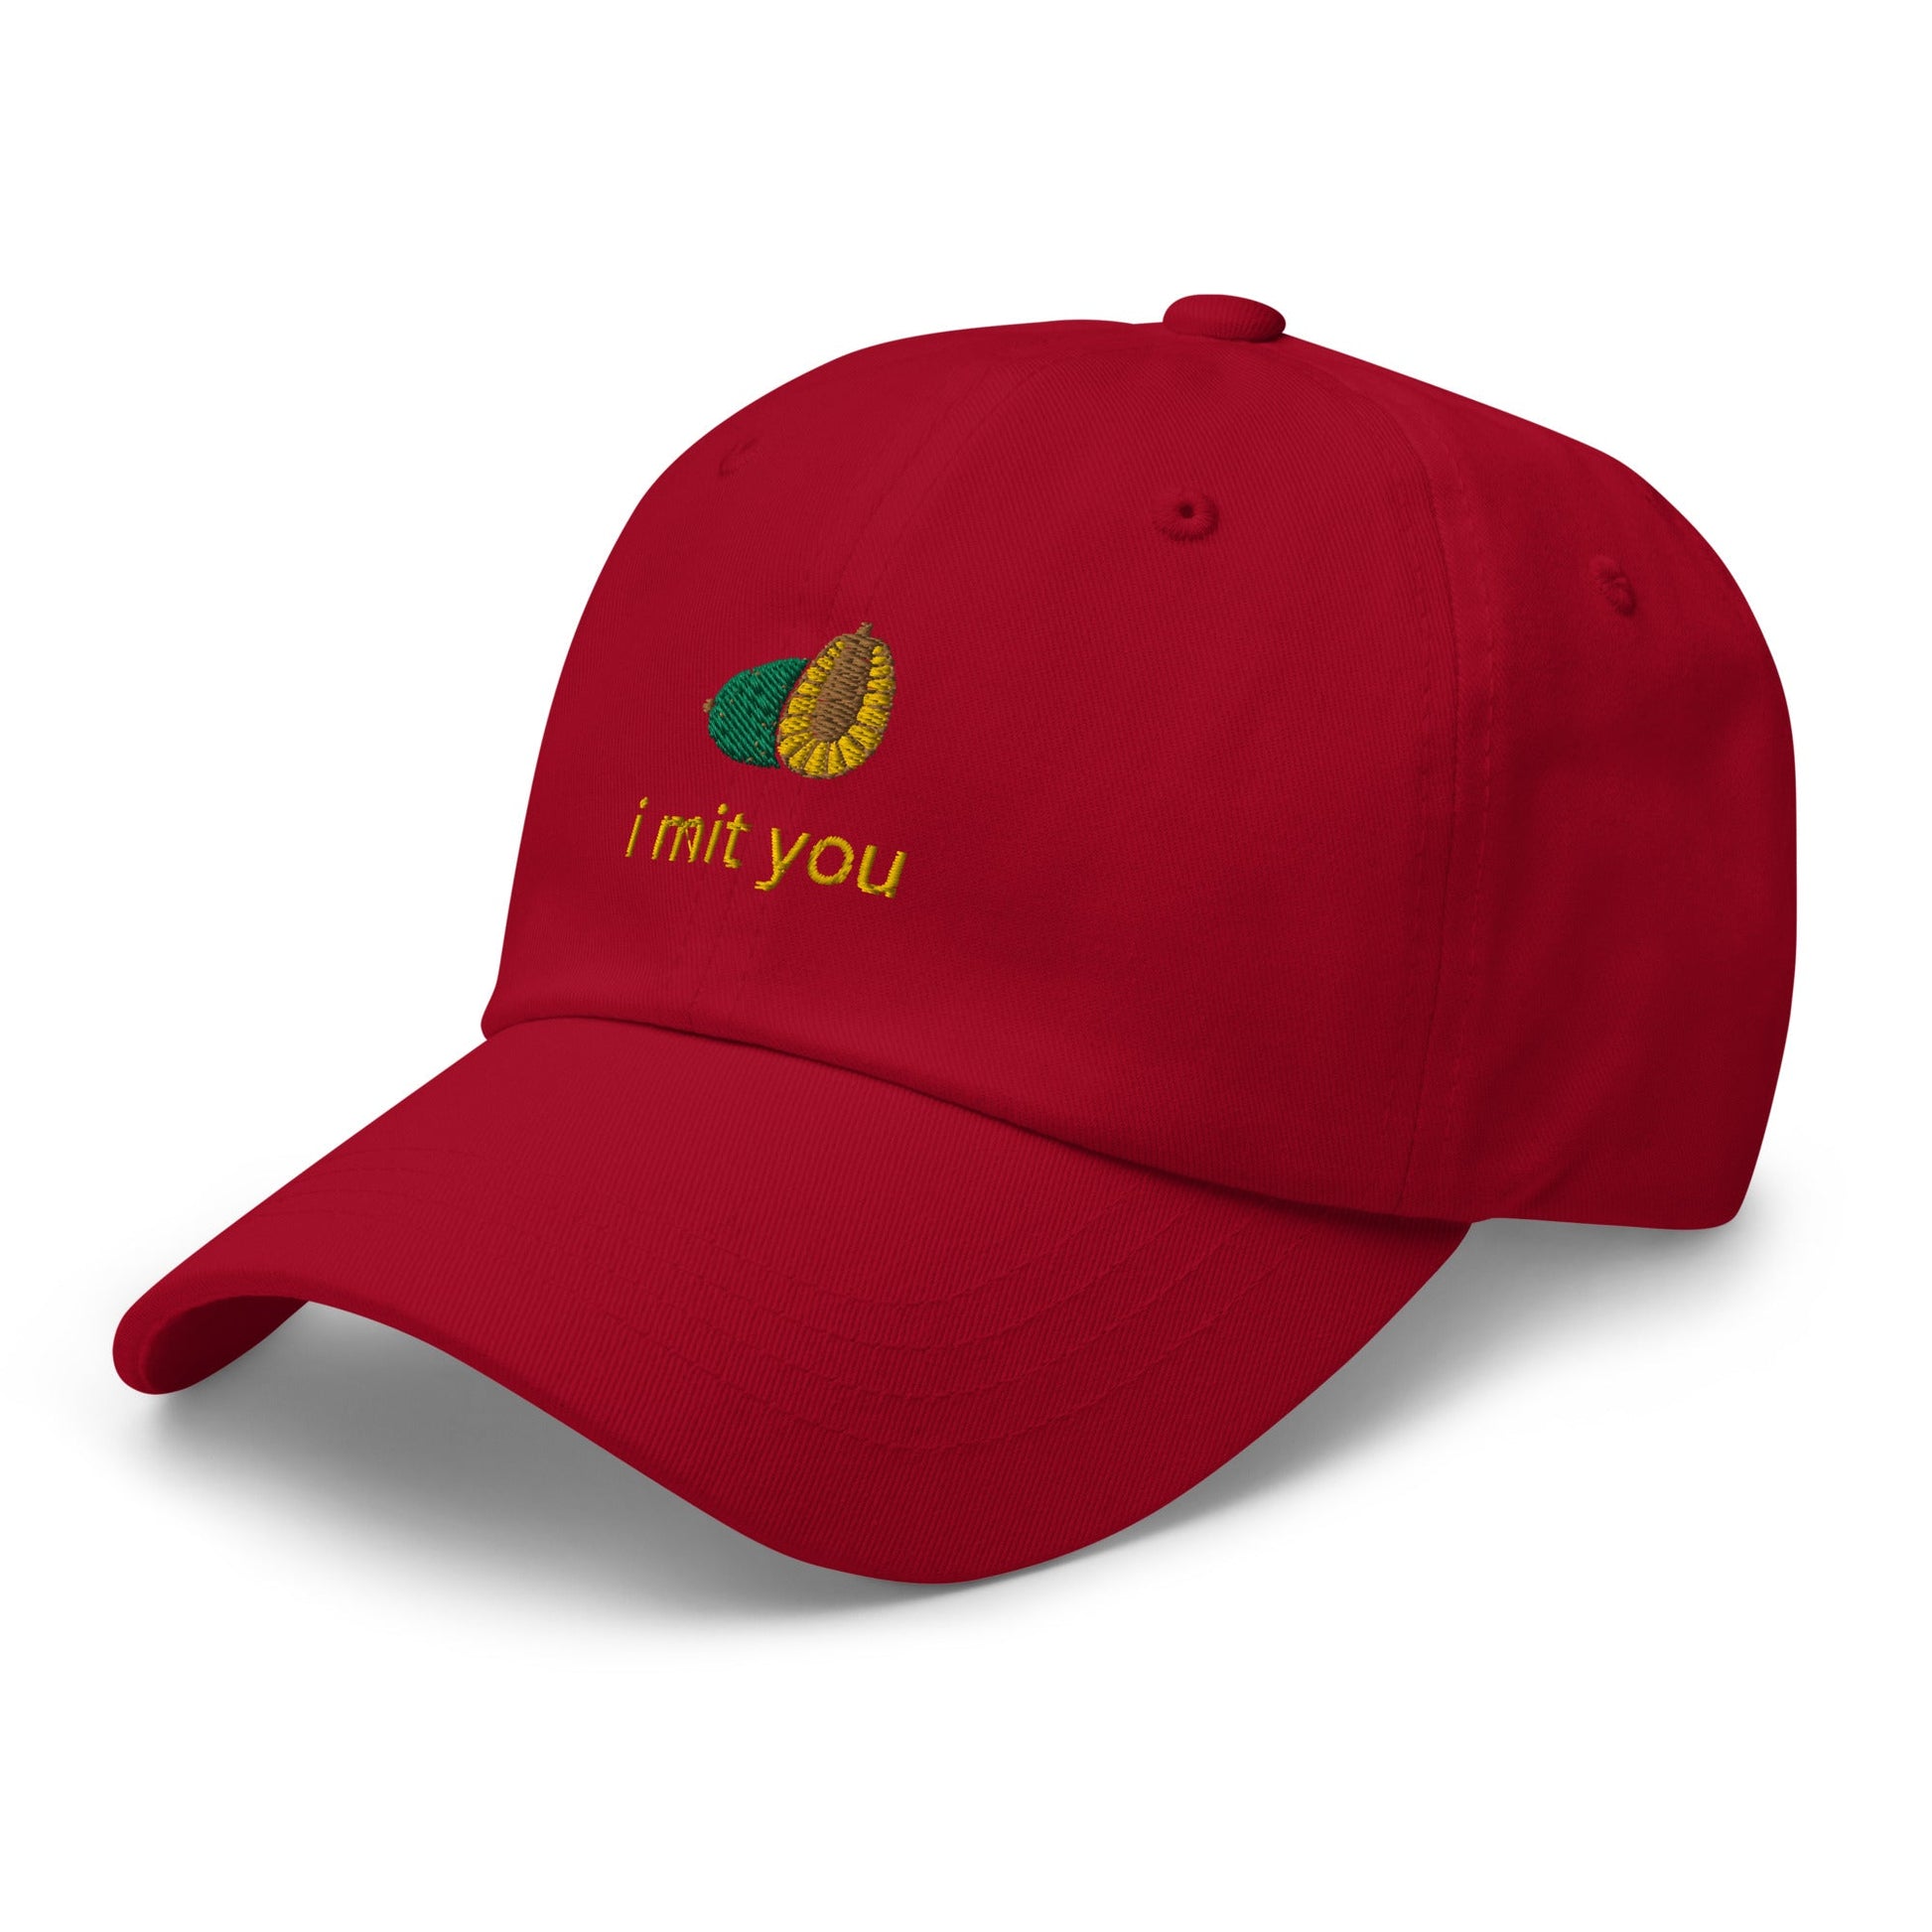 I MIT You Embroidered Dad hat - chucklecouture co.